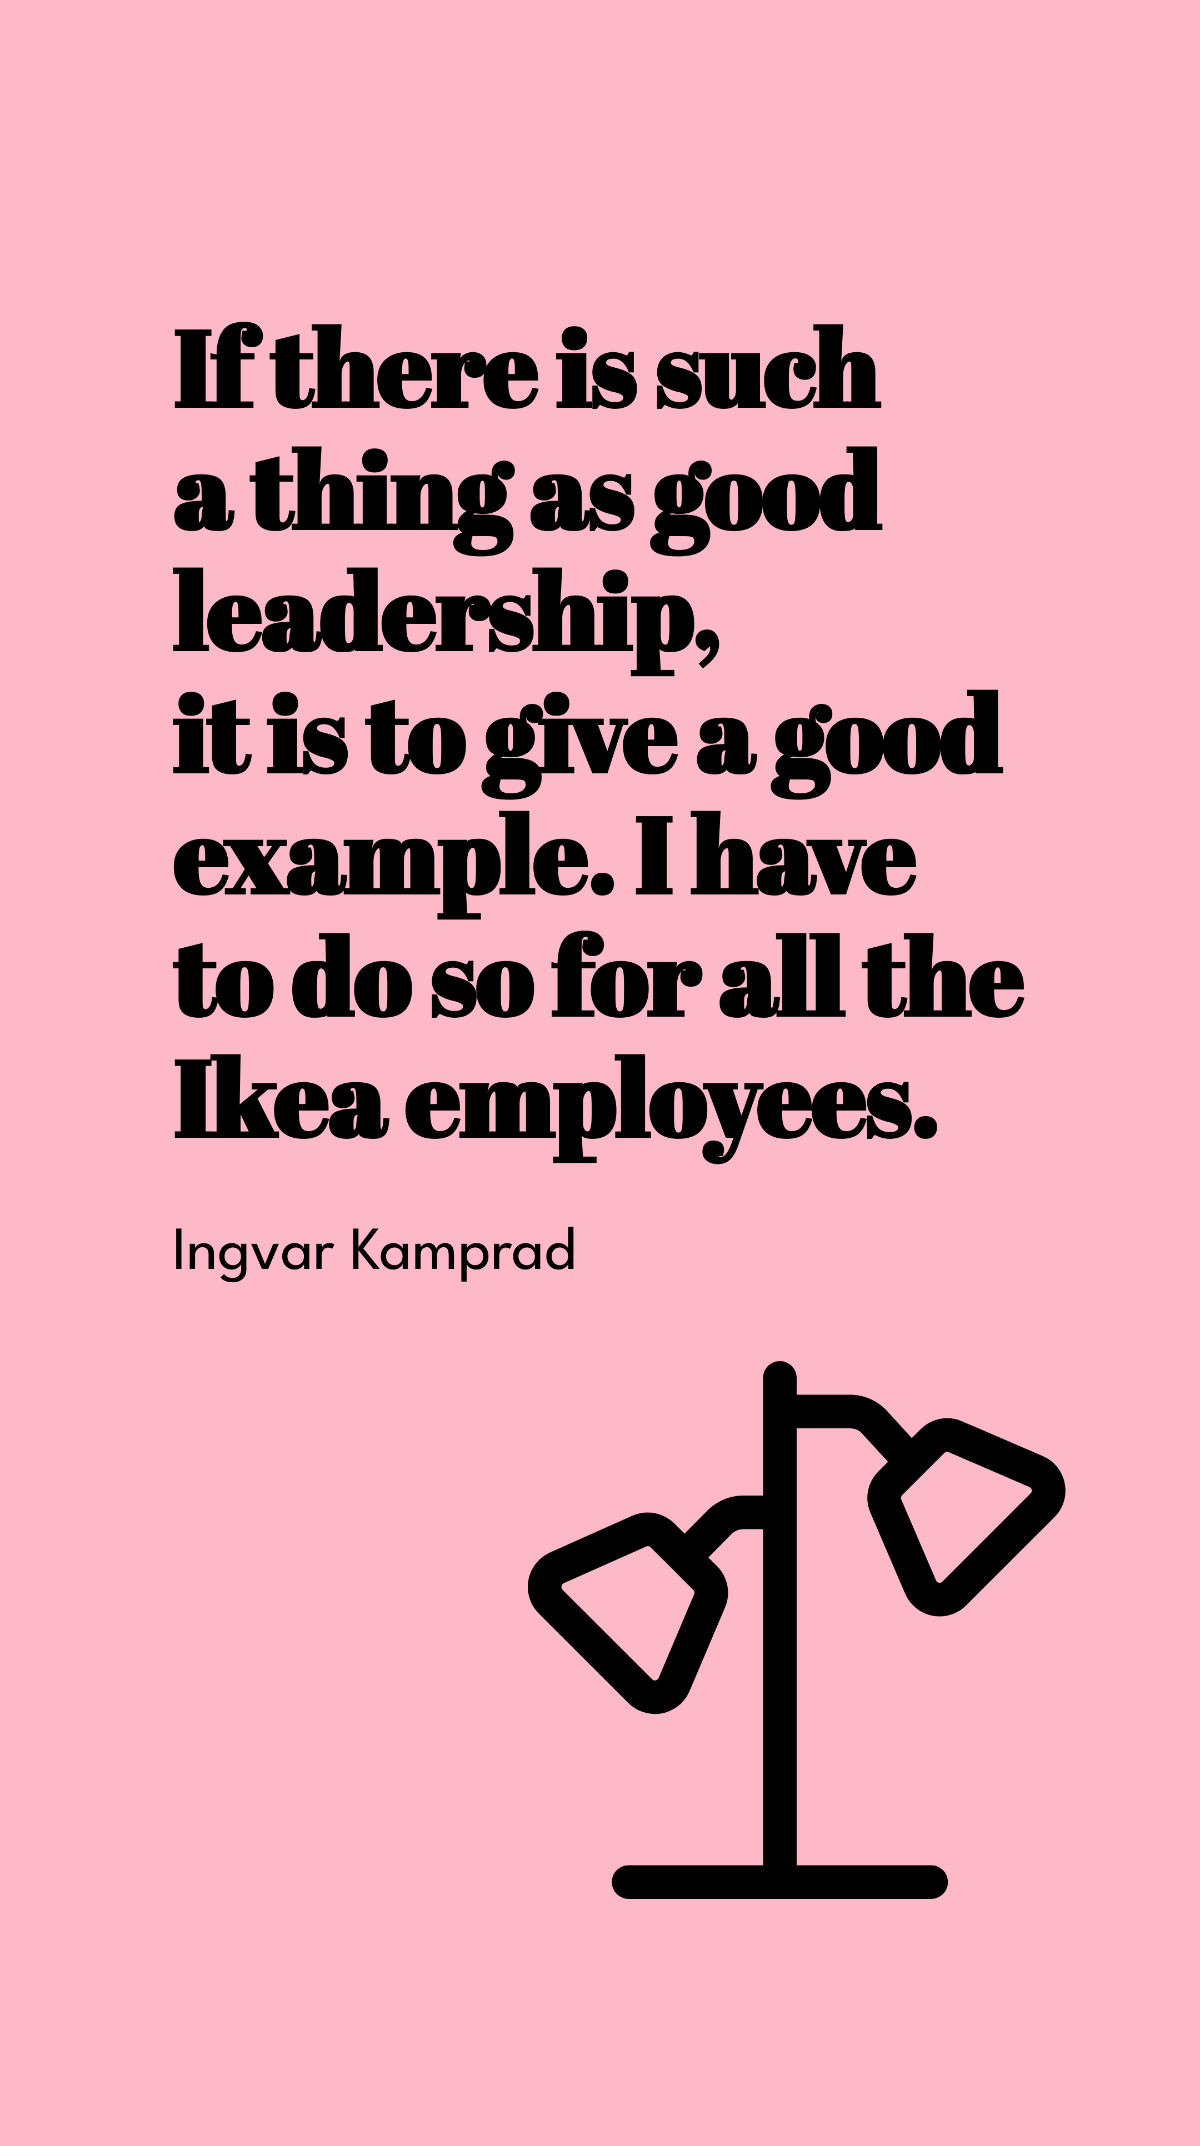 Ingvar Kamprad - If there is such a thing as good leadership, it is to give a good example. I have to do so for all the Ikea employees. Template